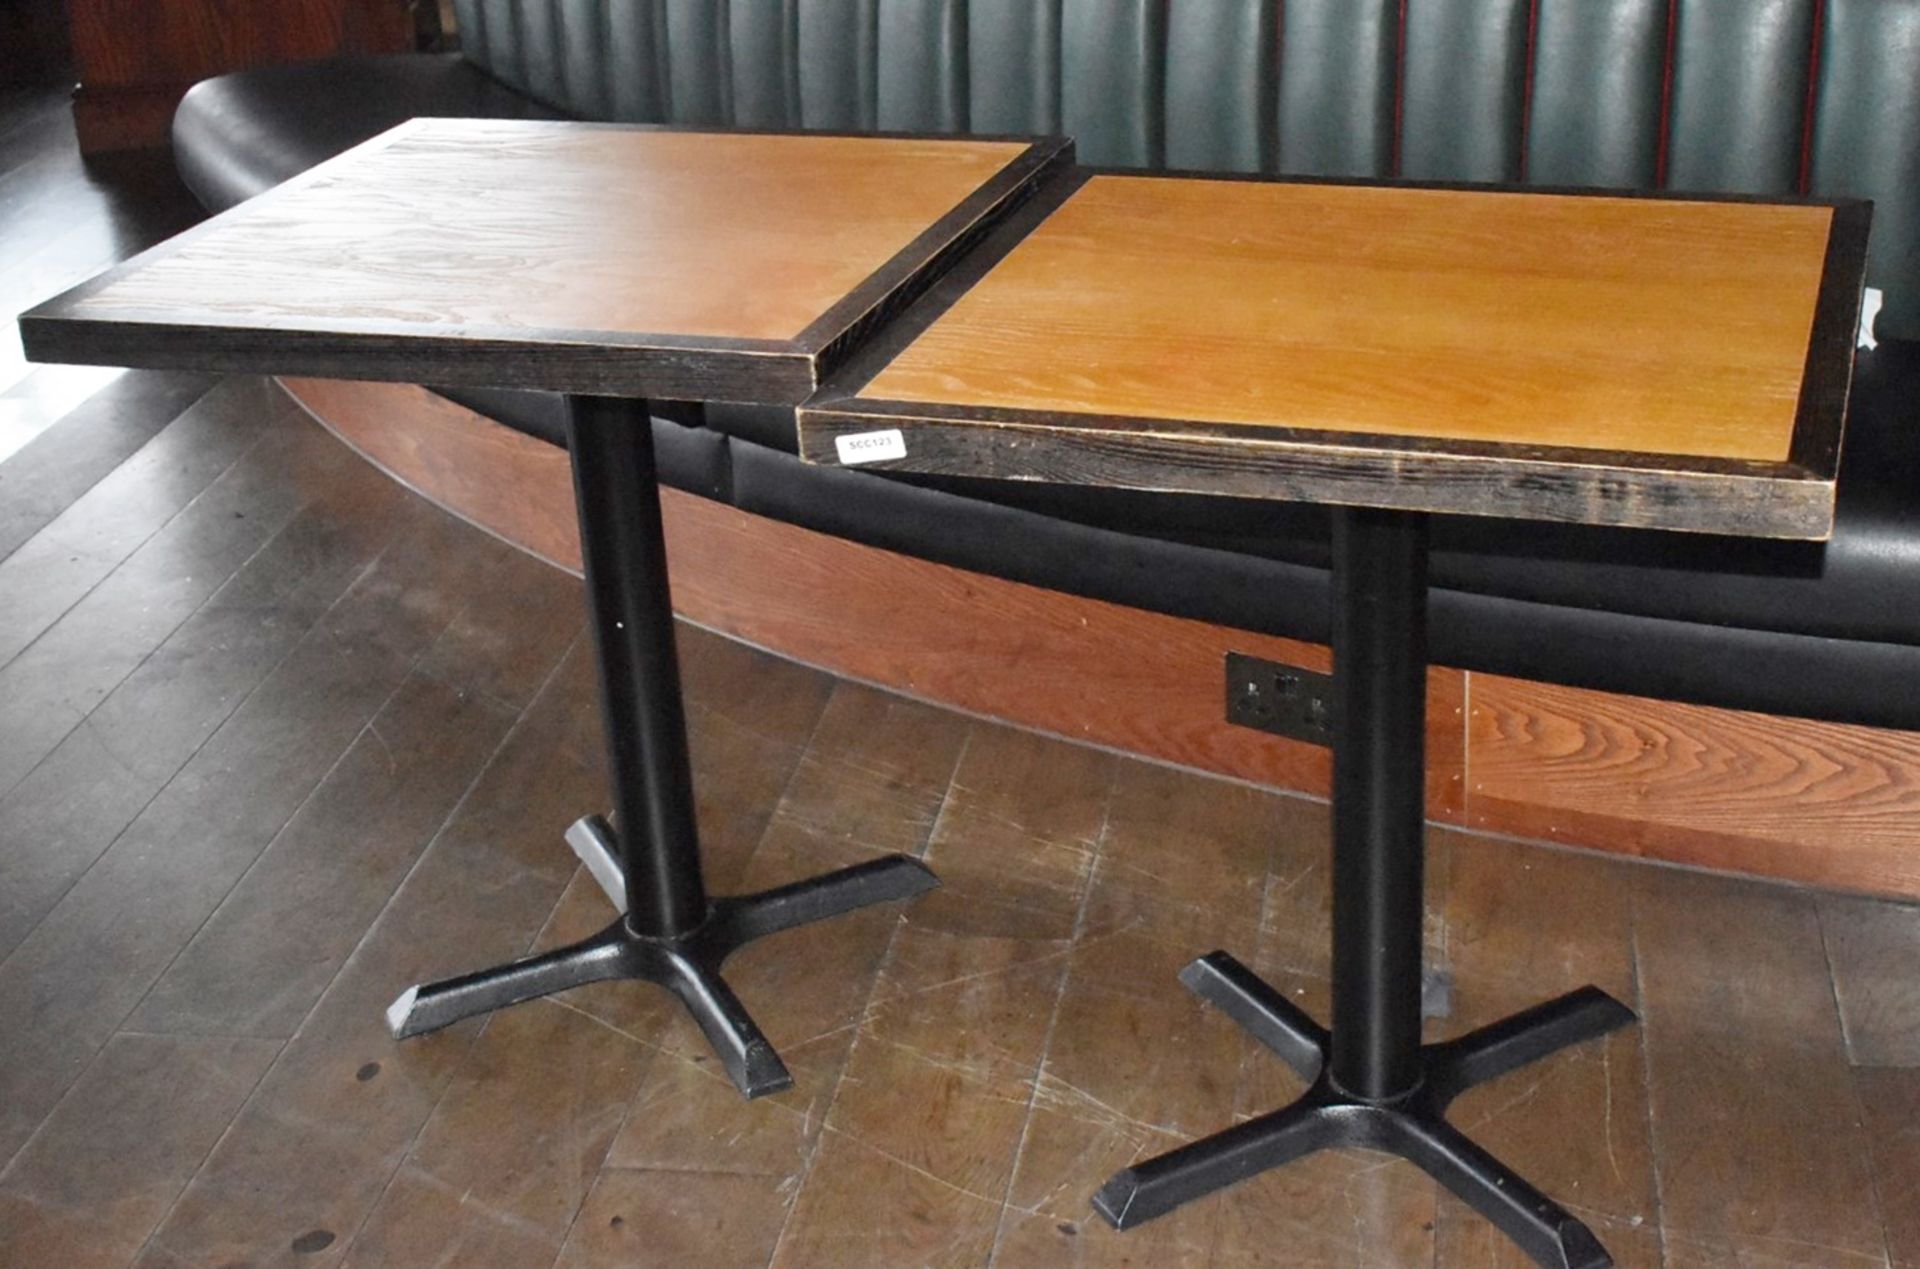 2 x Restaurant Dining Tables - Seats 2 Persons Per Table - Two Tone Wooden Top and Cast Iron Bases - Image 2 of 5